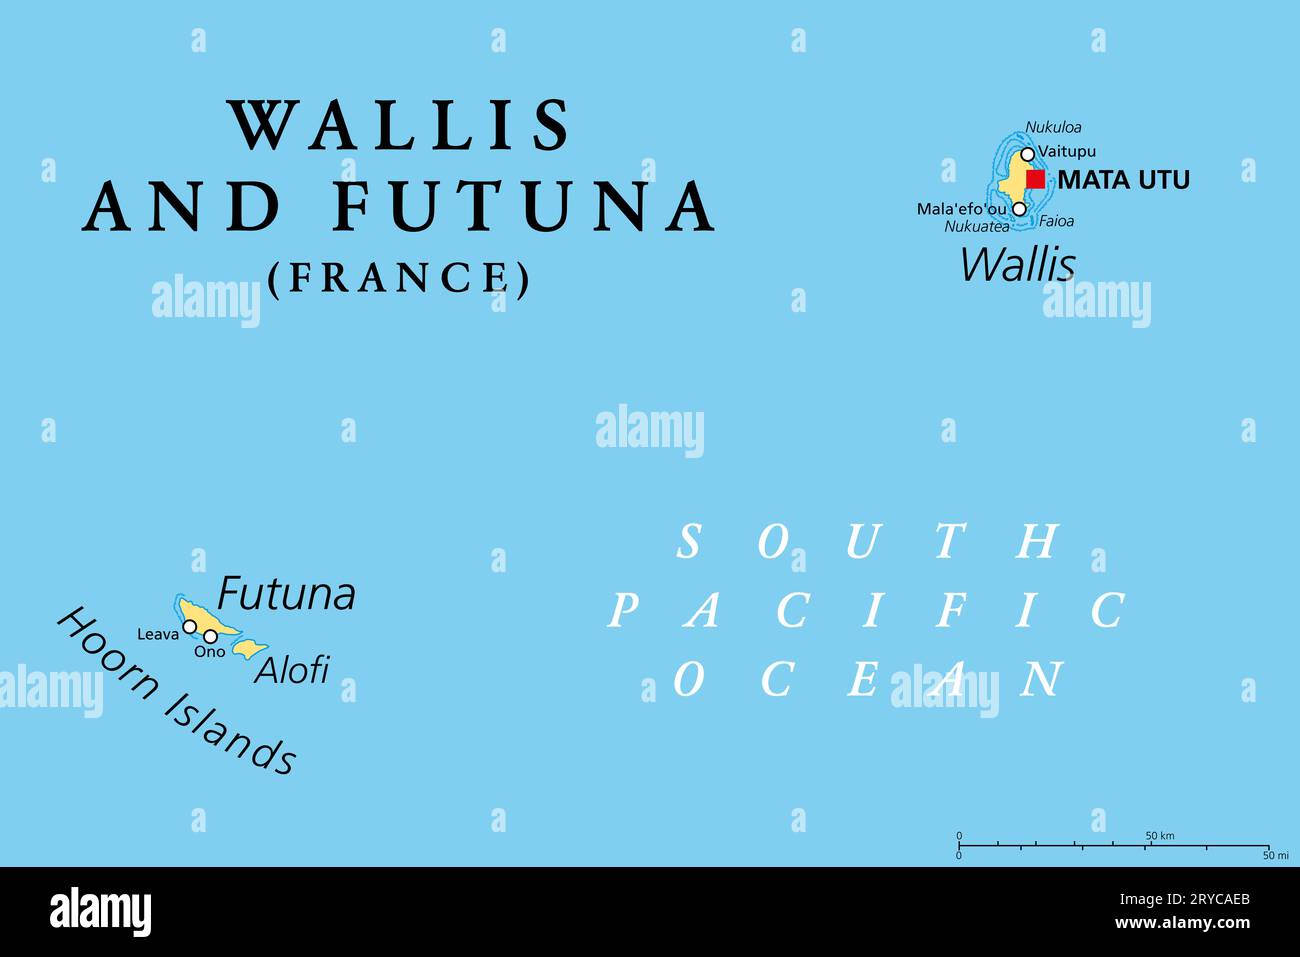 Wallis and Futuna, political map. Island collectivity of France in the South Pacific with capital Mata Utu, consisting of three main volcanic islands. Stock Photo